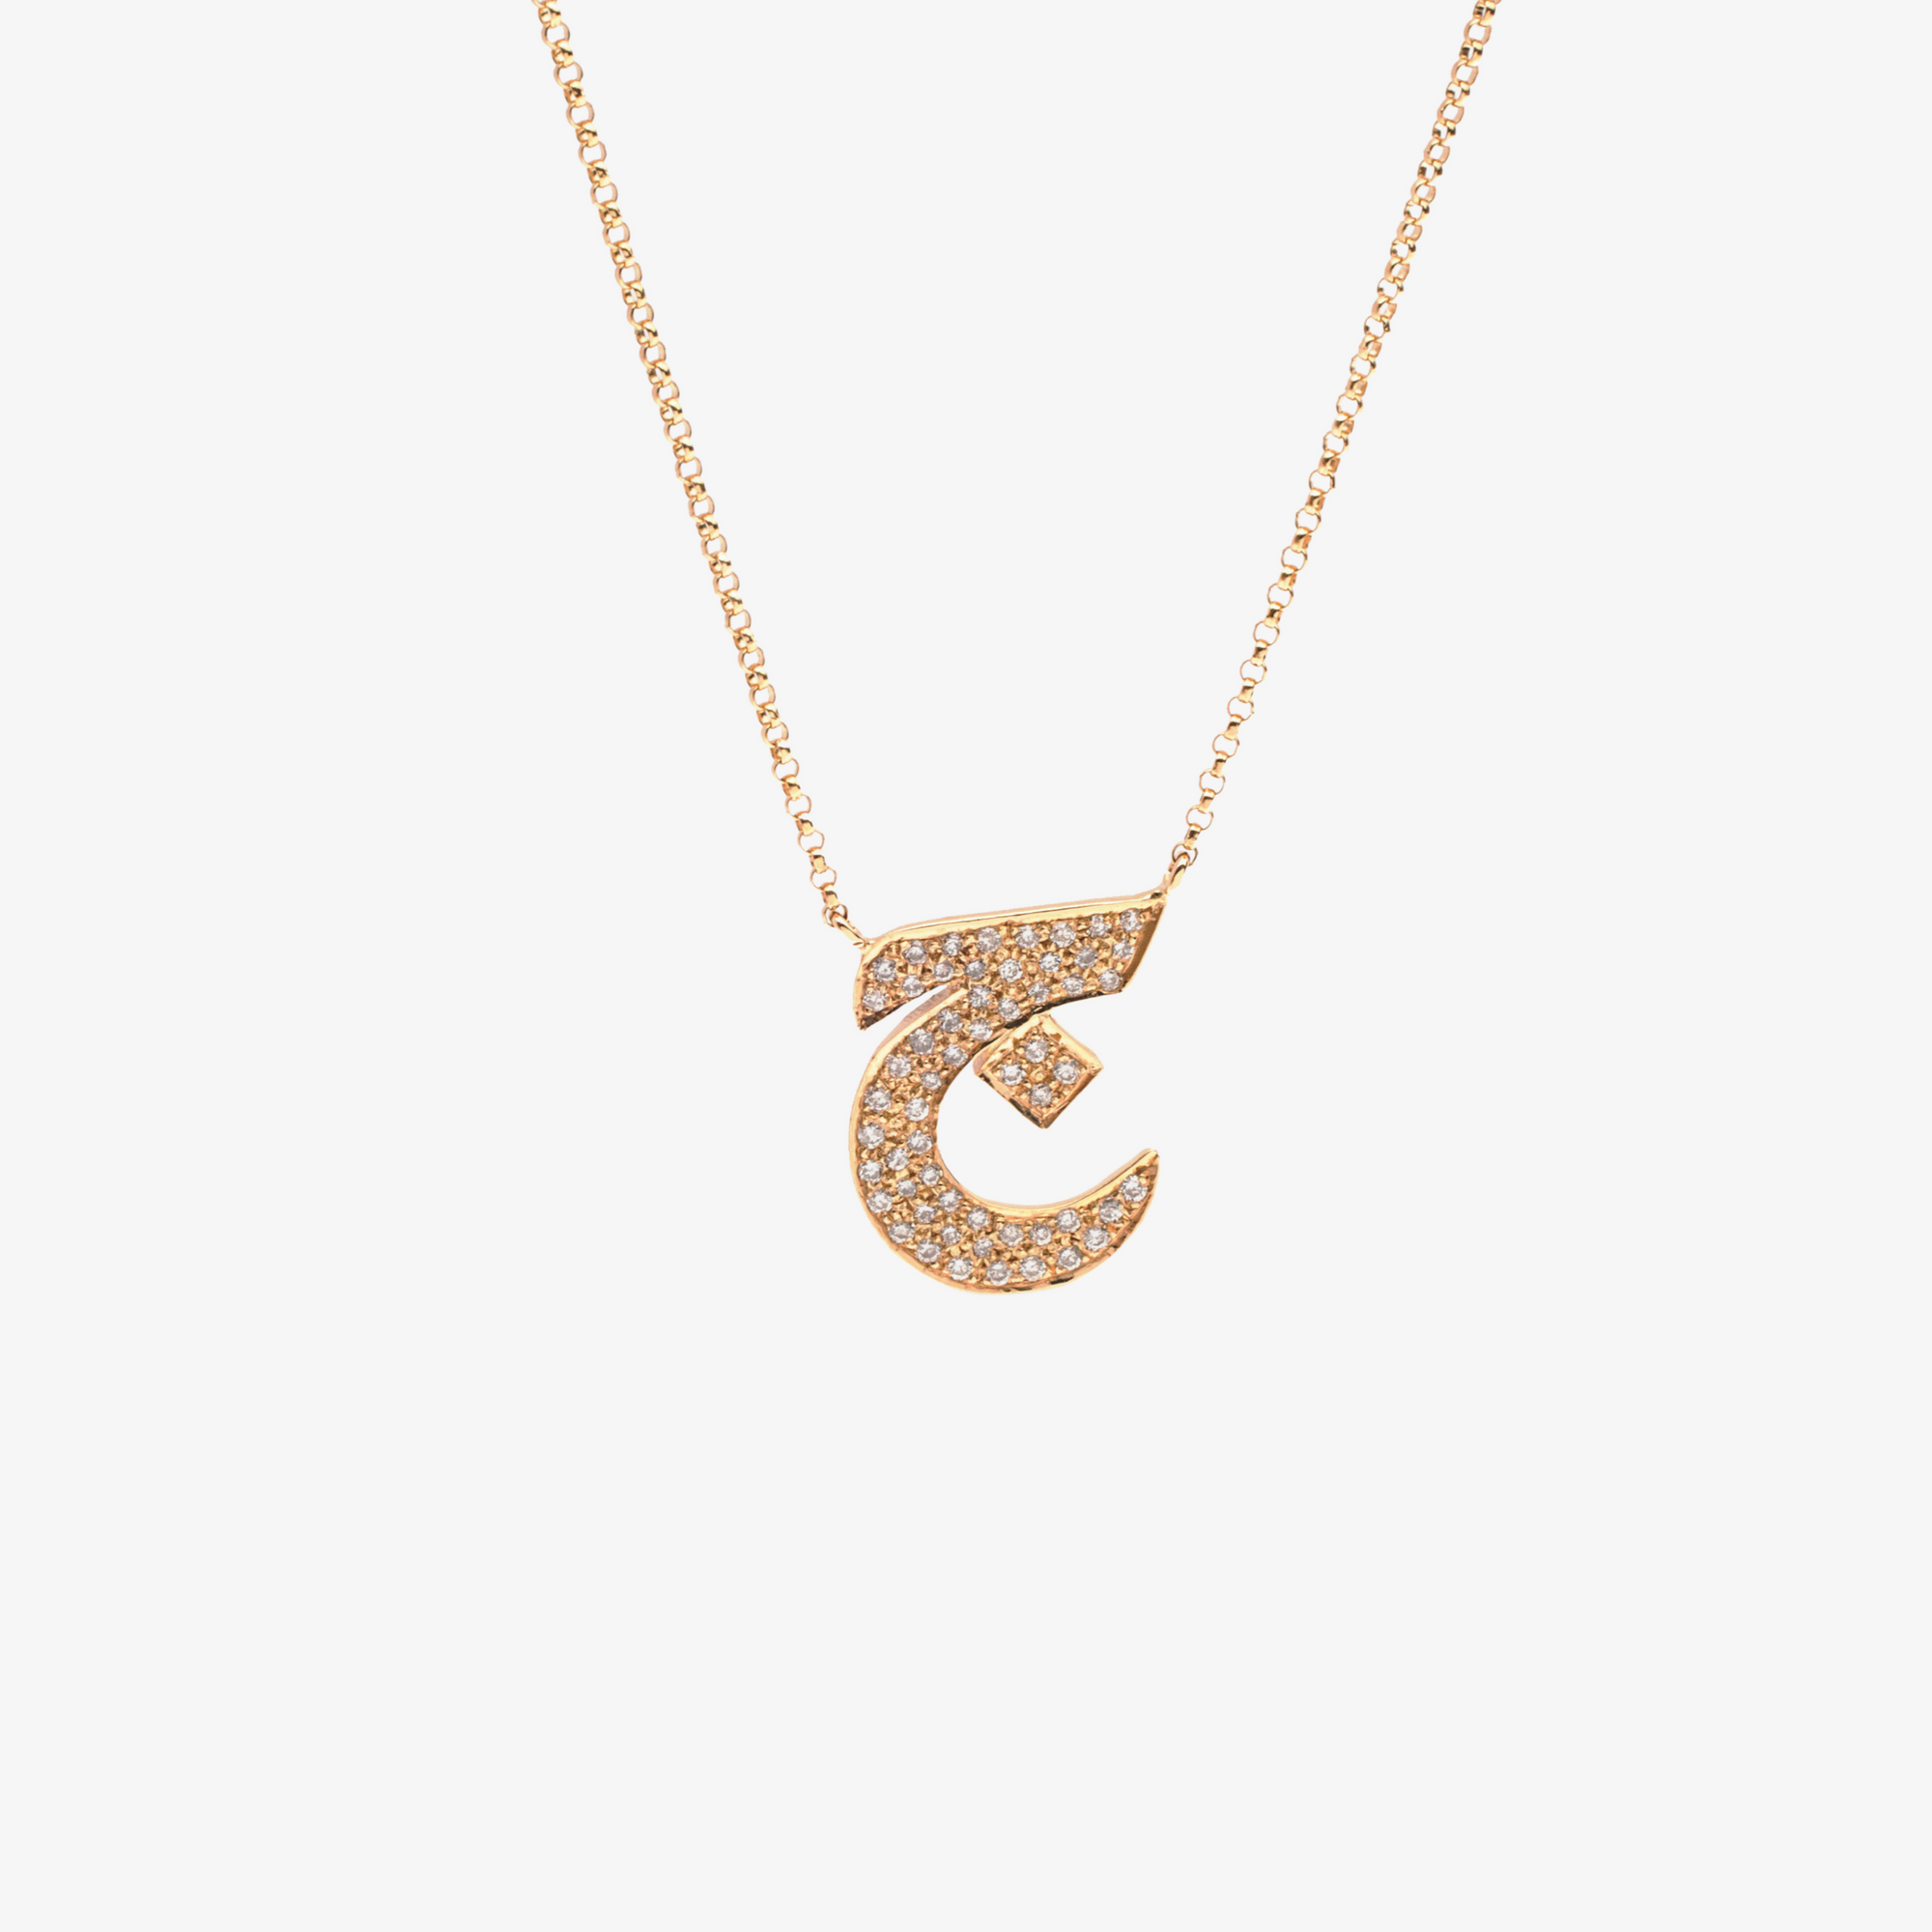 OULA - Gold & Diamond Letter Necklace. Small Size